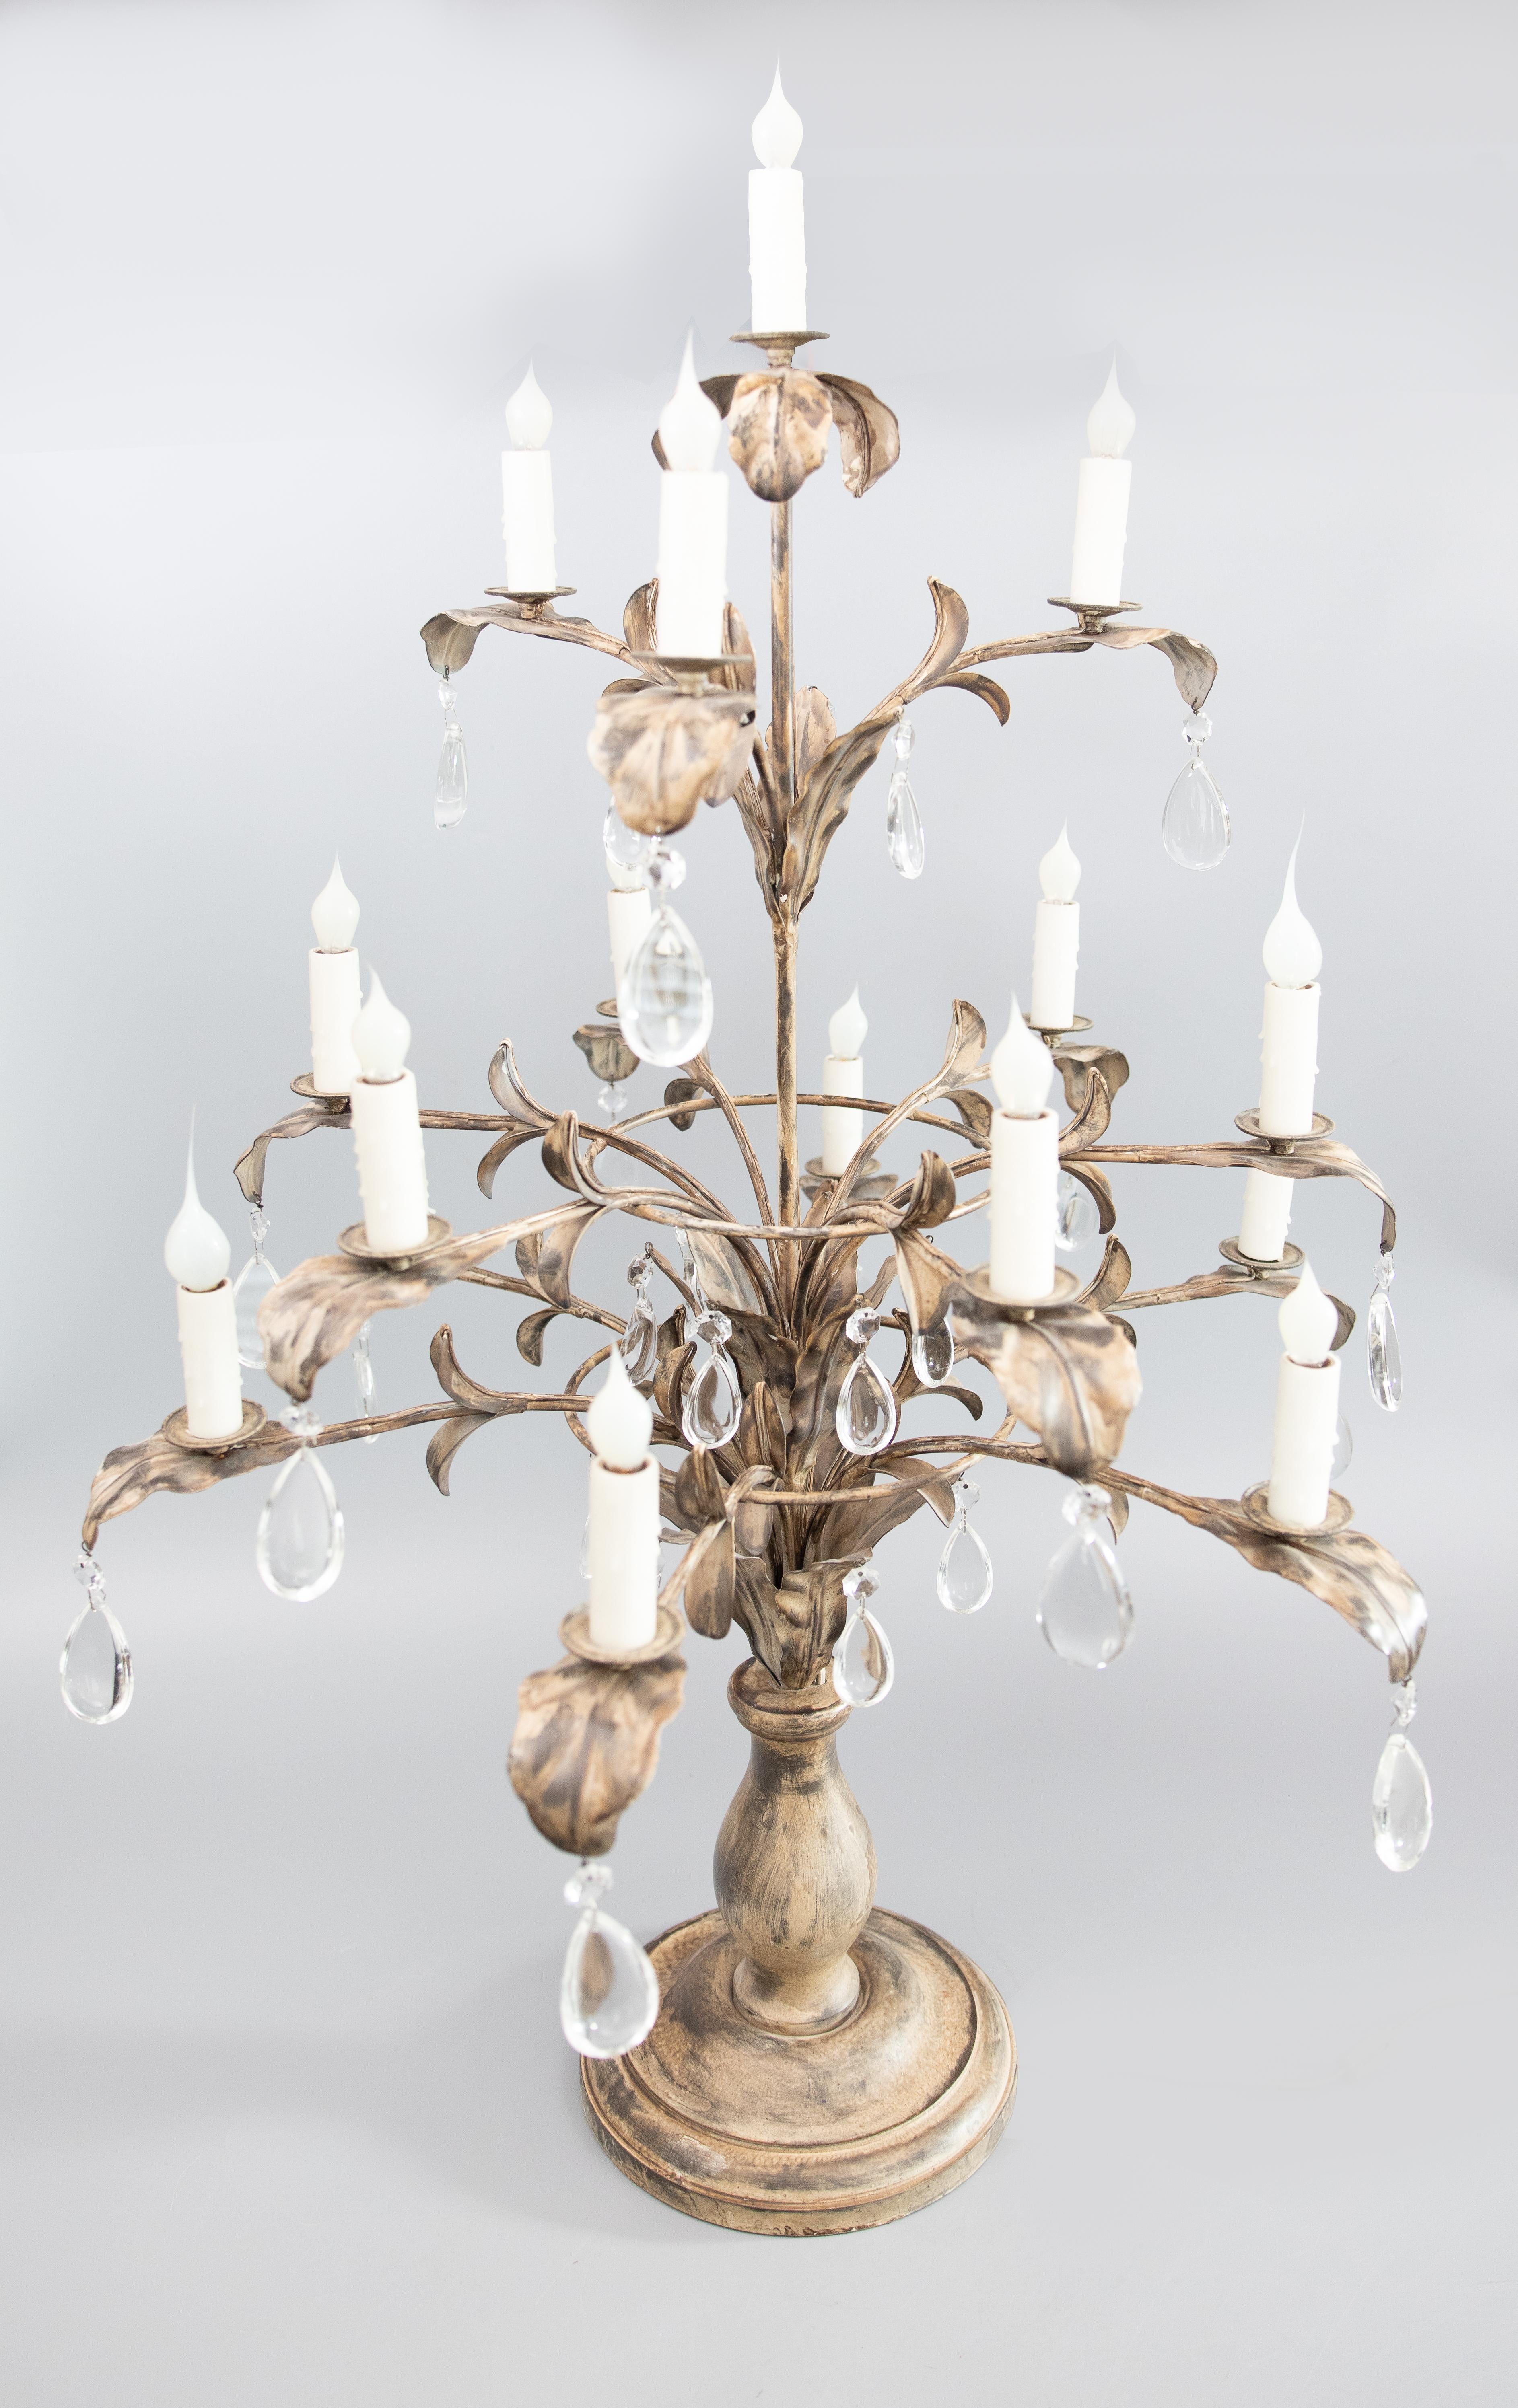 Pair of large, stately 16 light tole candelabras with turned wooden bases supporting metal foliate branches with crystal teardrop pendants, electrified. 

DIMENSIONS
29ʺW × 29ʺD × 43ʺH